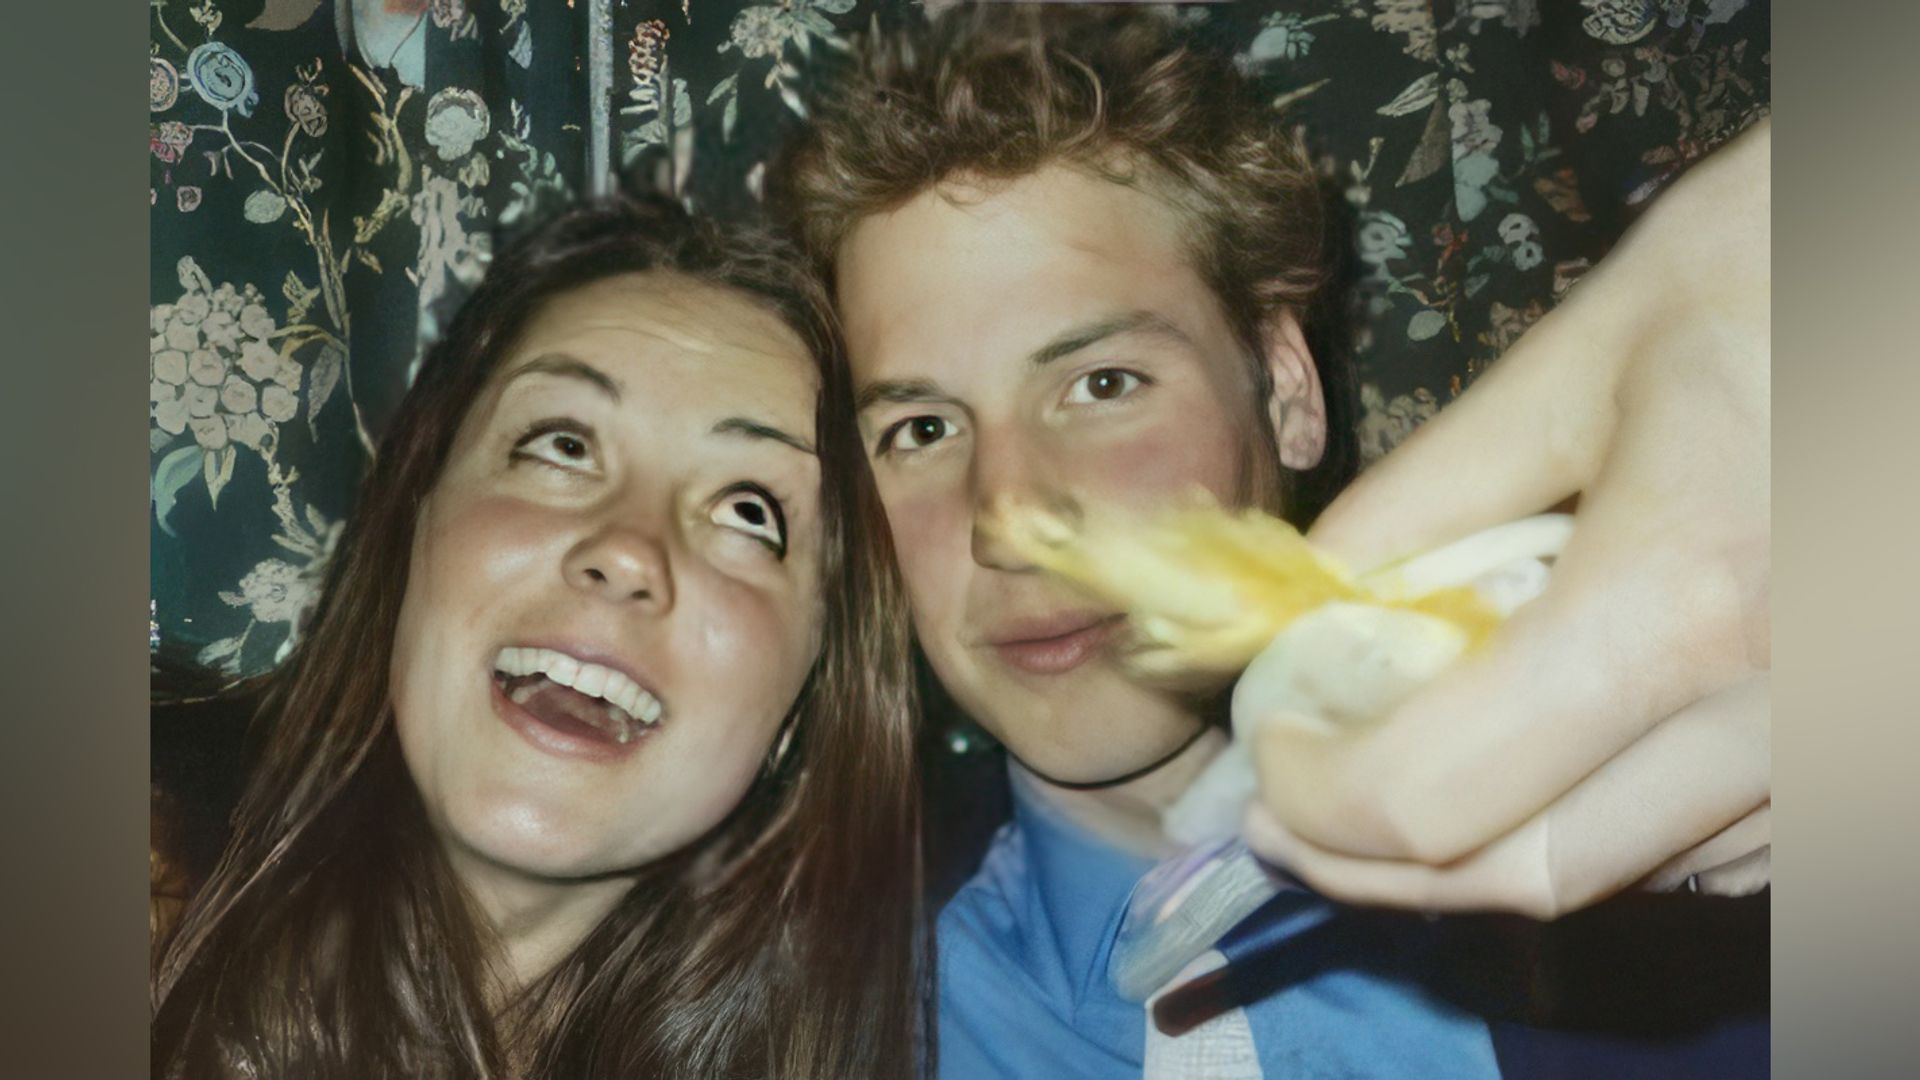 Prince William and Kate Middleton in their youth